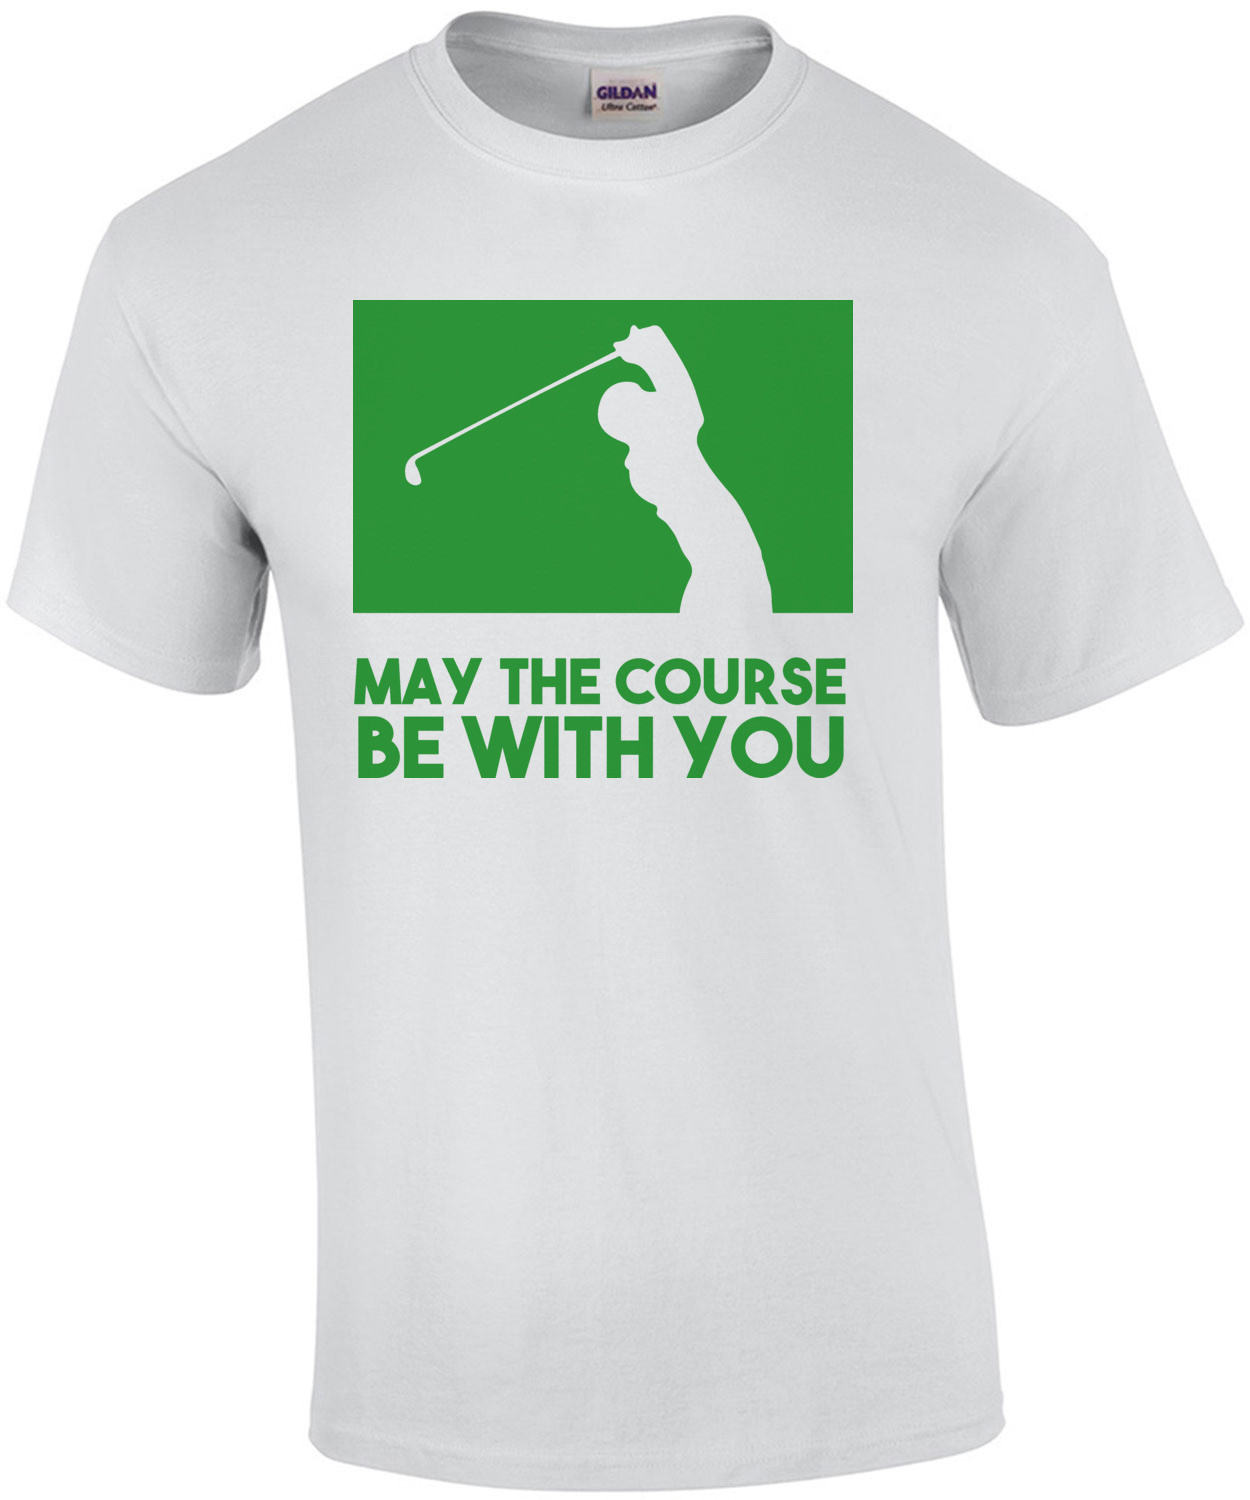 May the course be with you - Golf